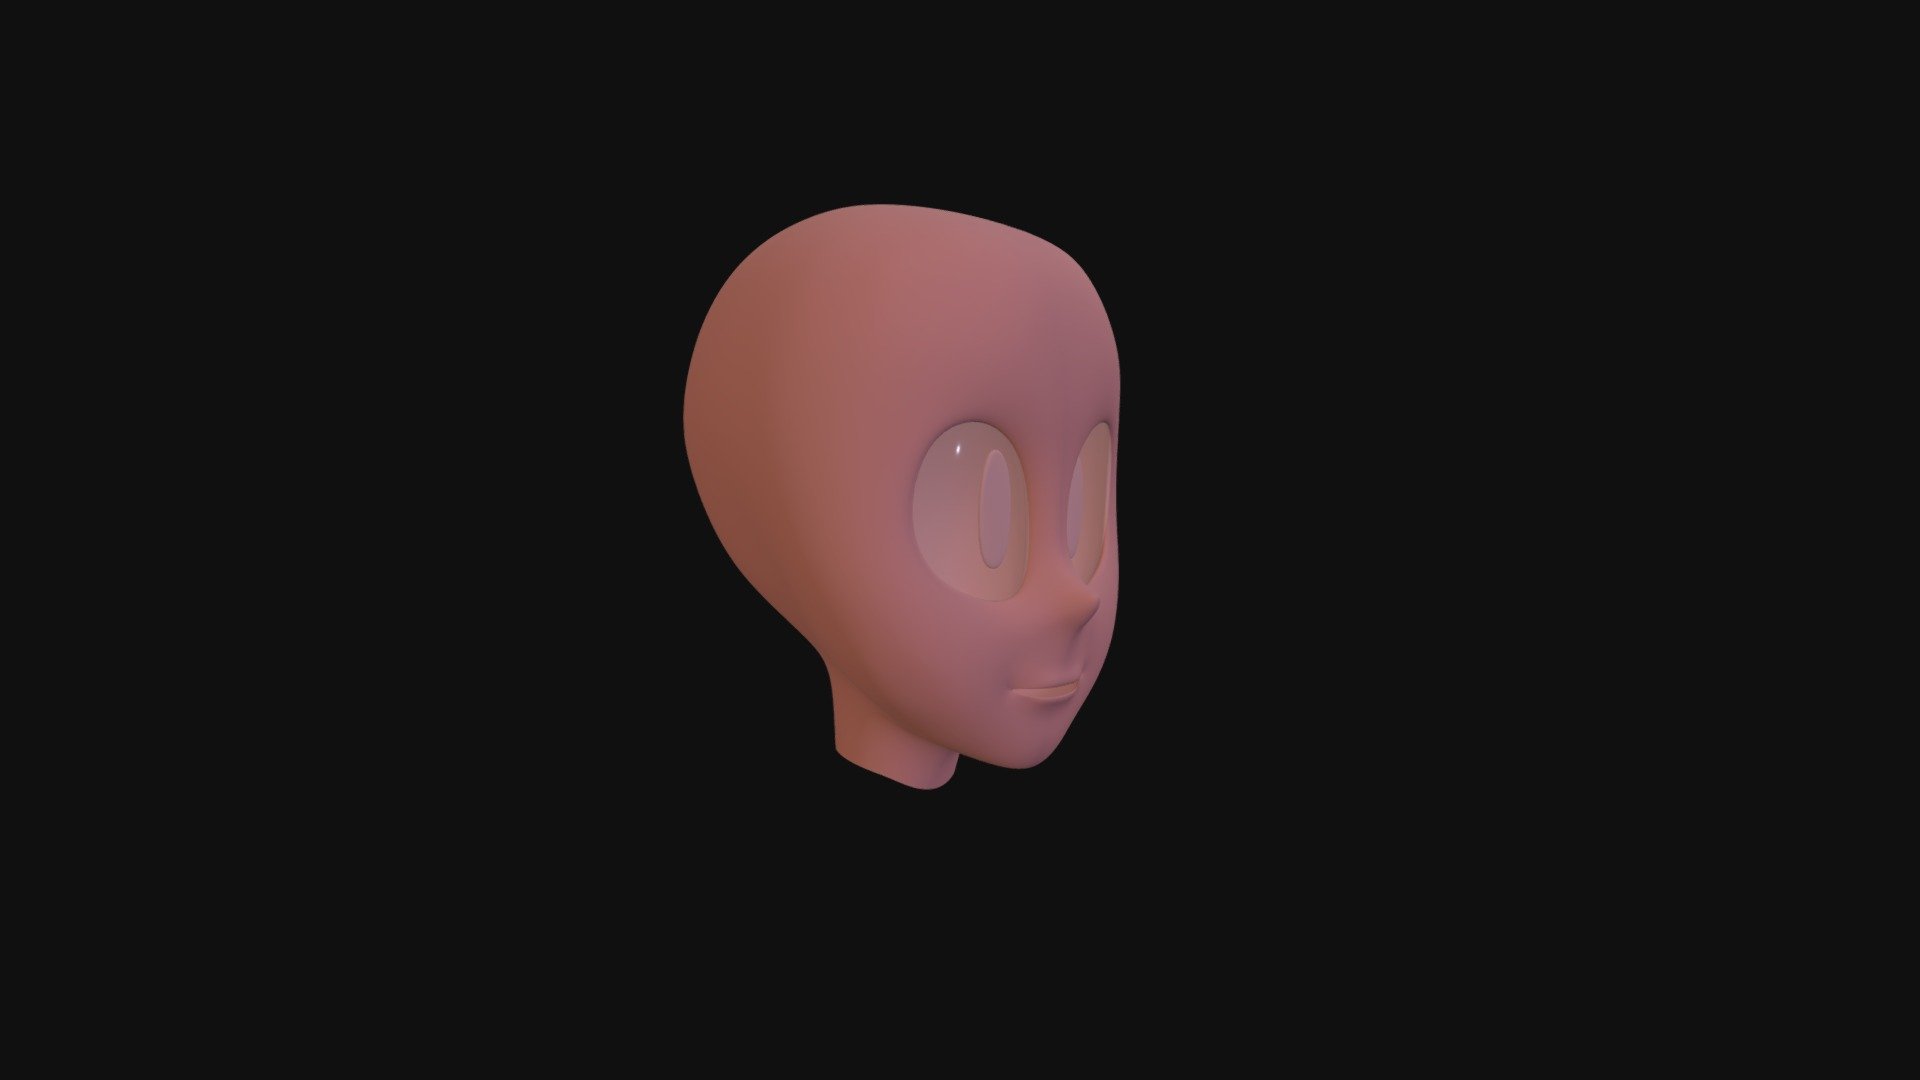 A low poly version available in Patreon patreon.com/ultiMasterious
Verts: 1813
Faces: 1756
Tris: 3512 - Cartoon Style Head - 3D model by ultiMasterious 3d model